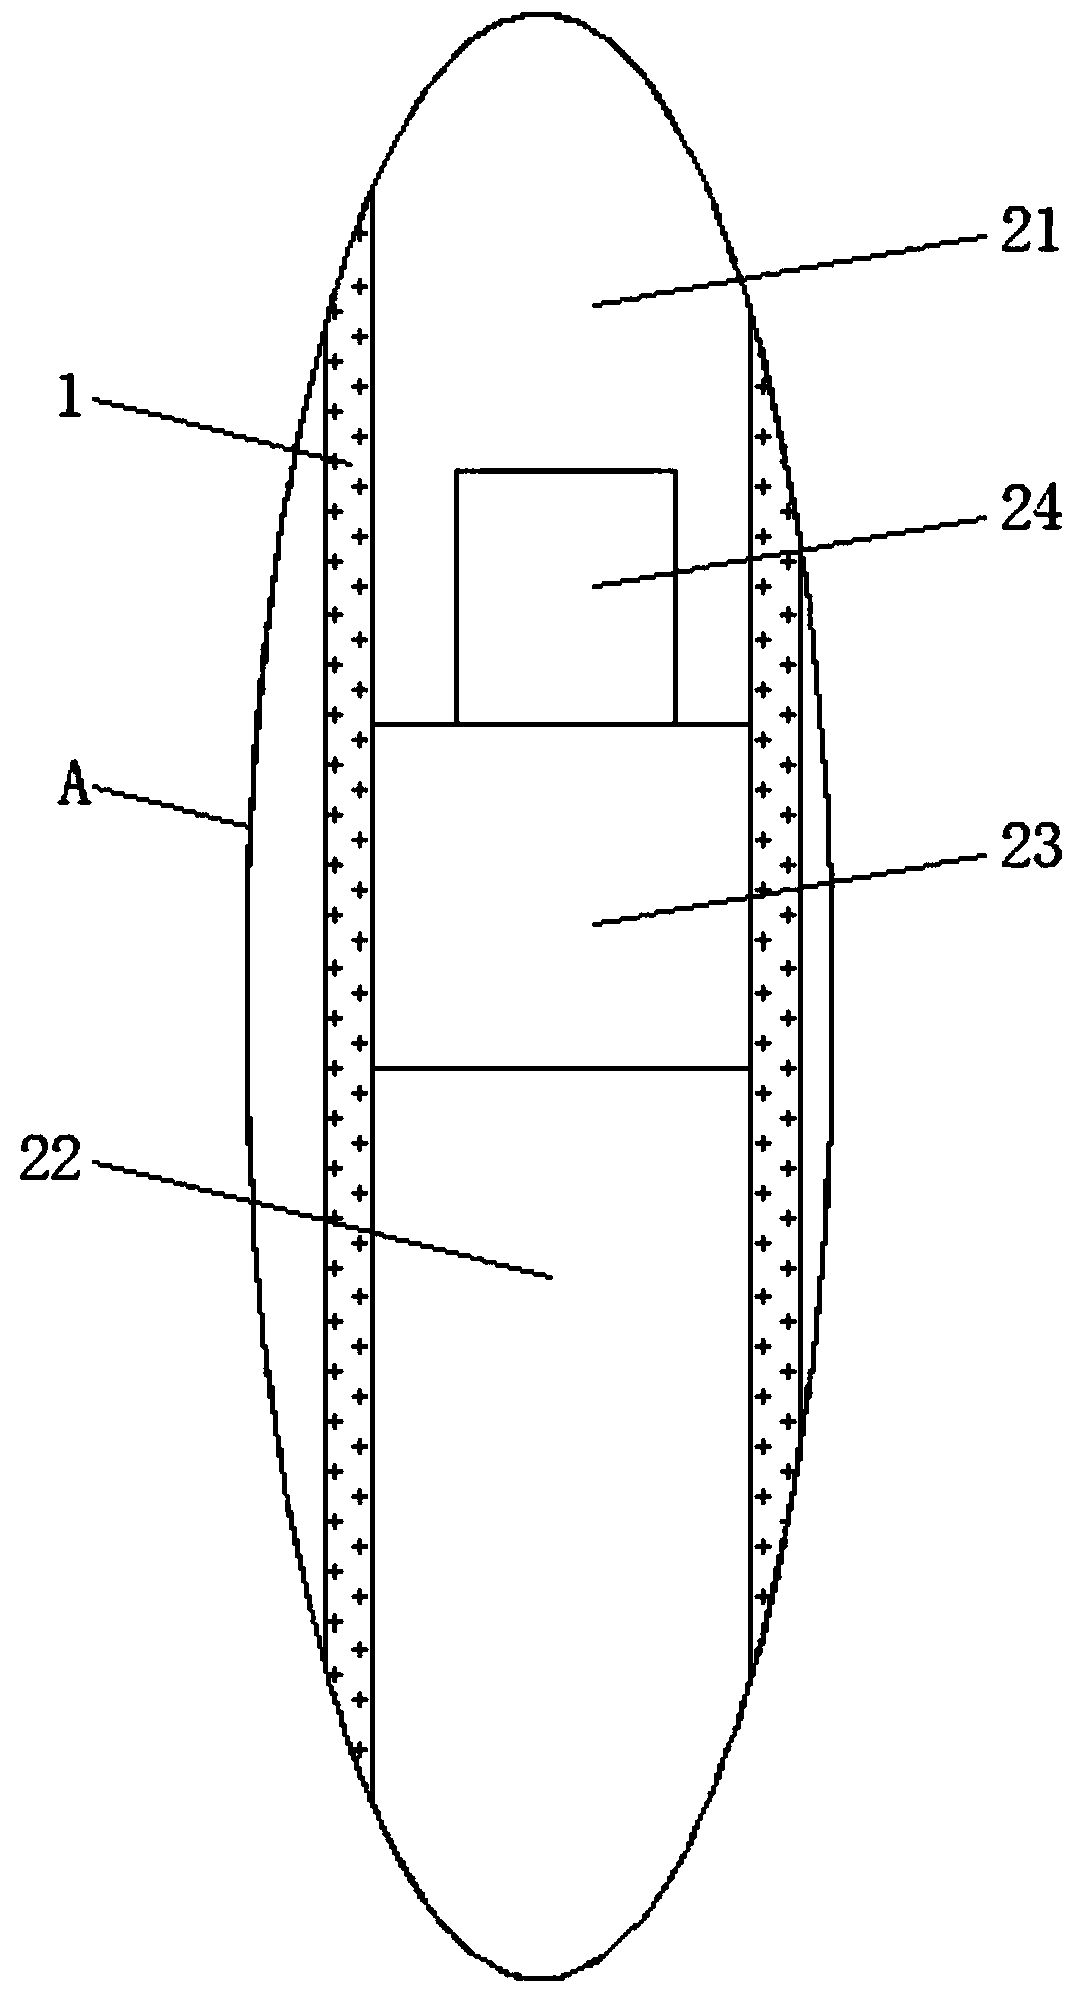 Rotary learning display device